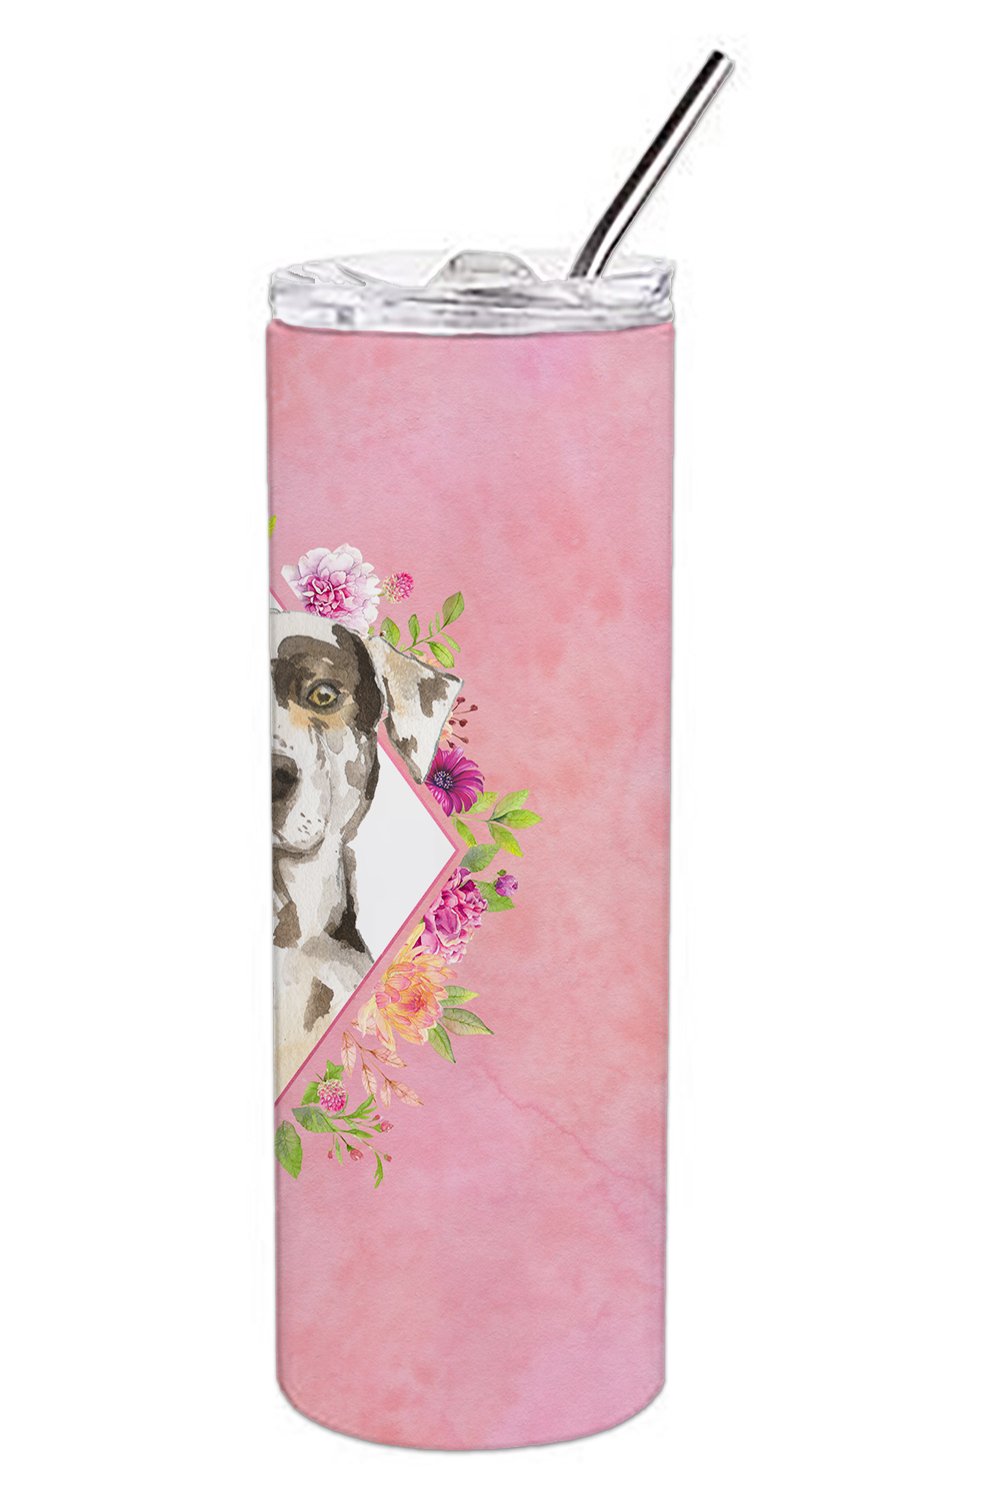 Catahoula Leopard Dog Pink Flowers Double Walled Stainless Steel 20 oz Skinny Tumbler CK4249TBL20 by Caroline's Treasures